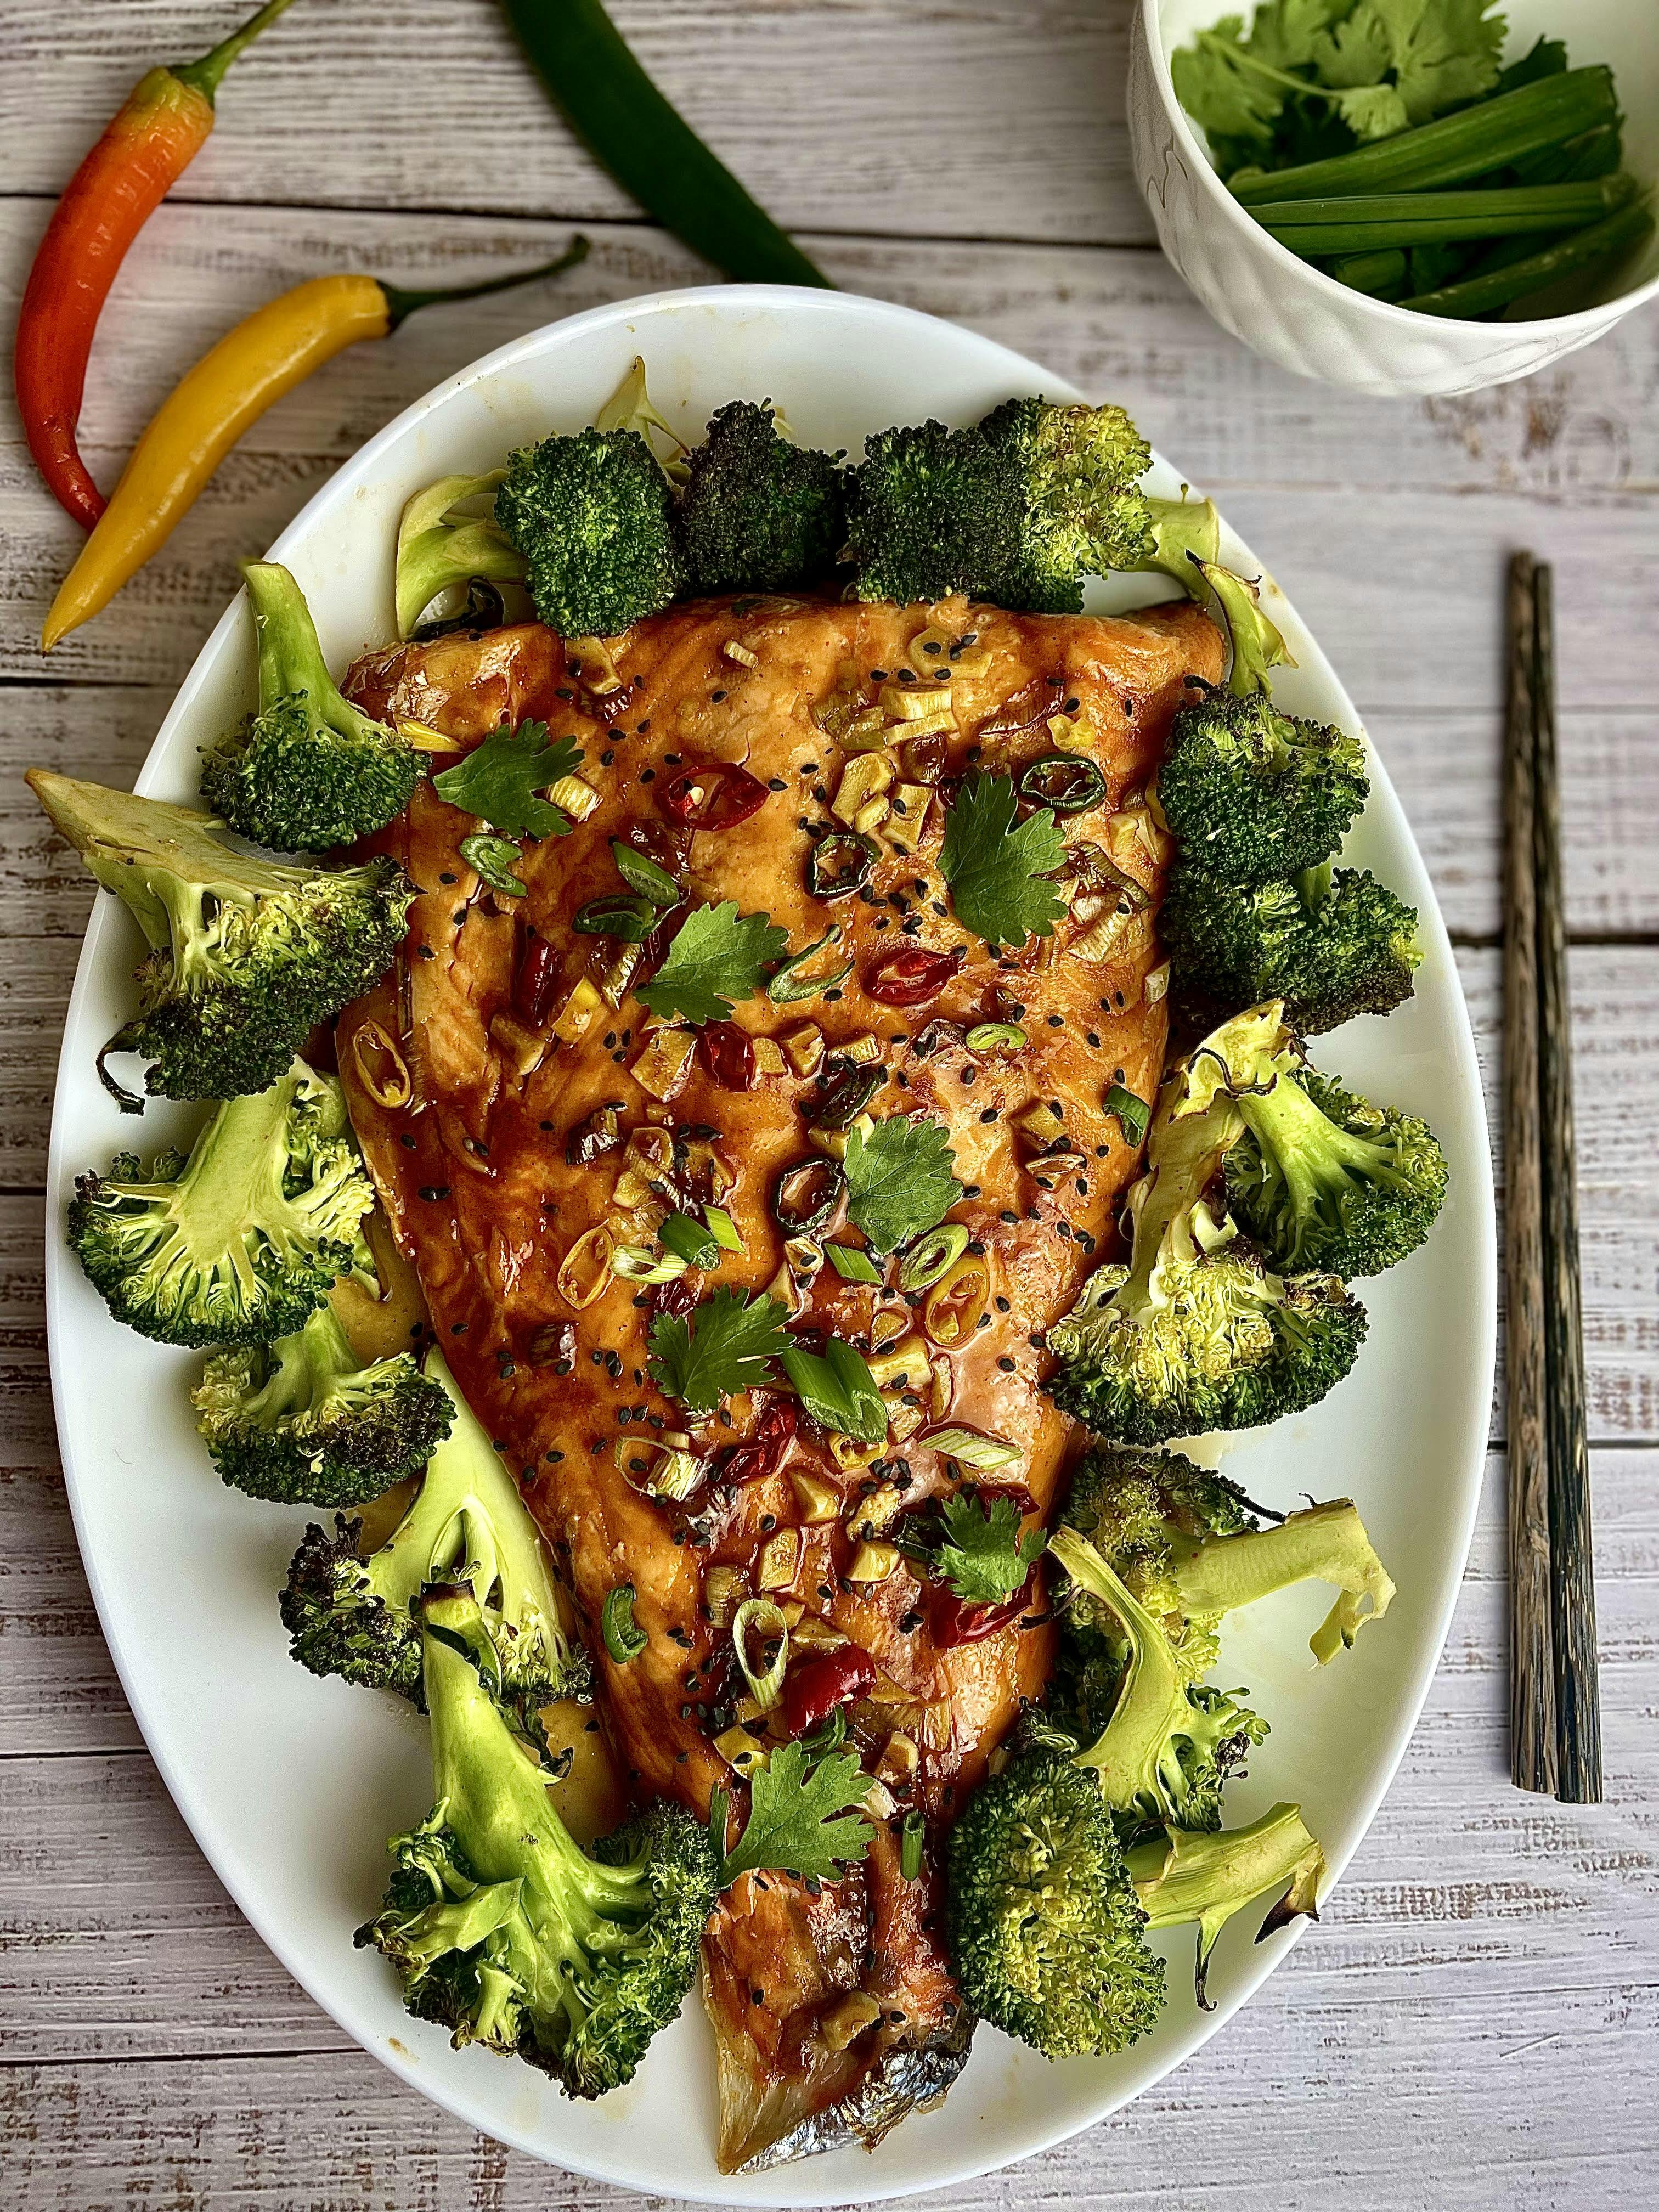 Picture for Asian Glazed whole Salmon